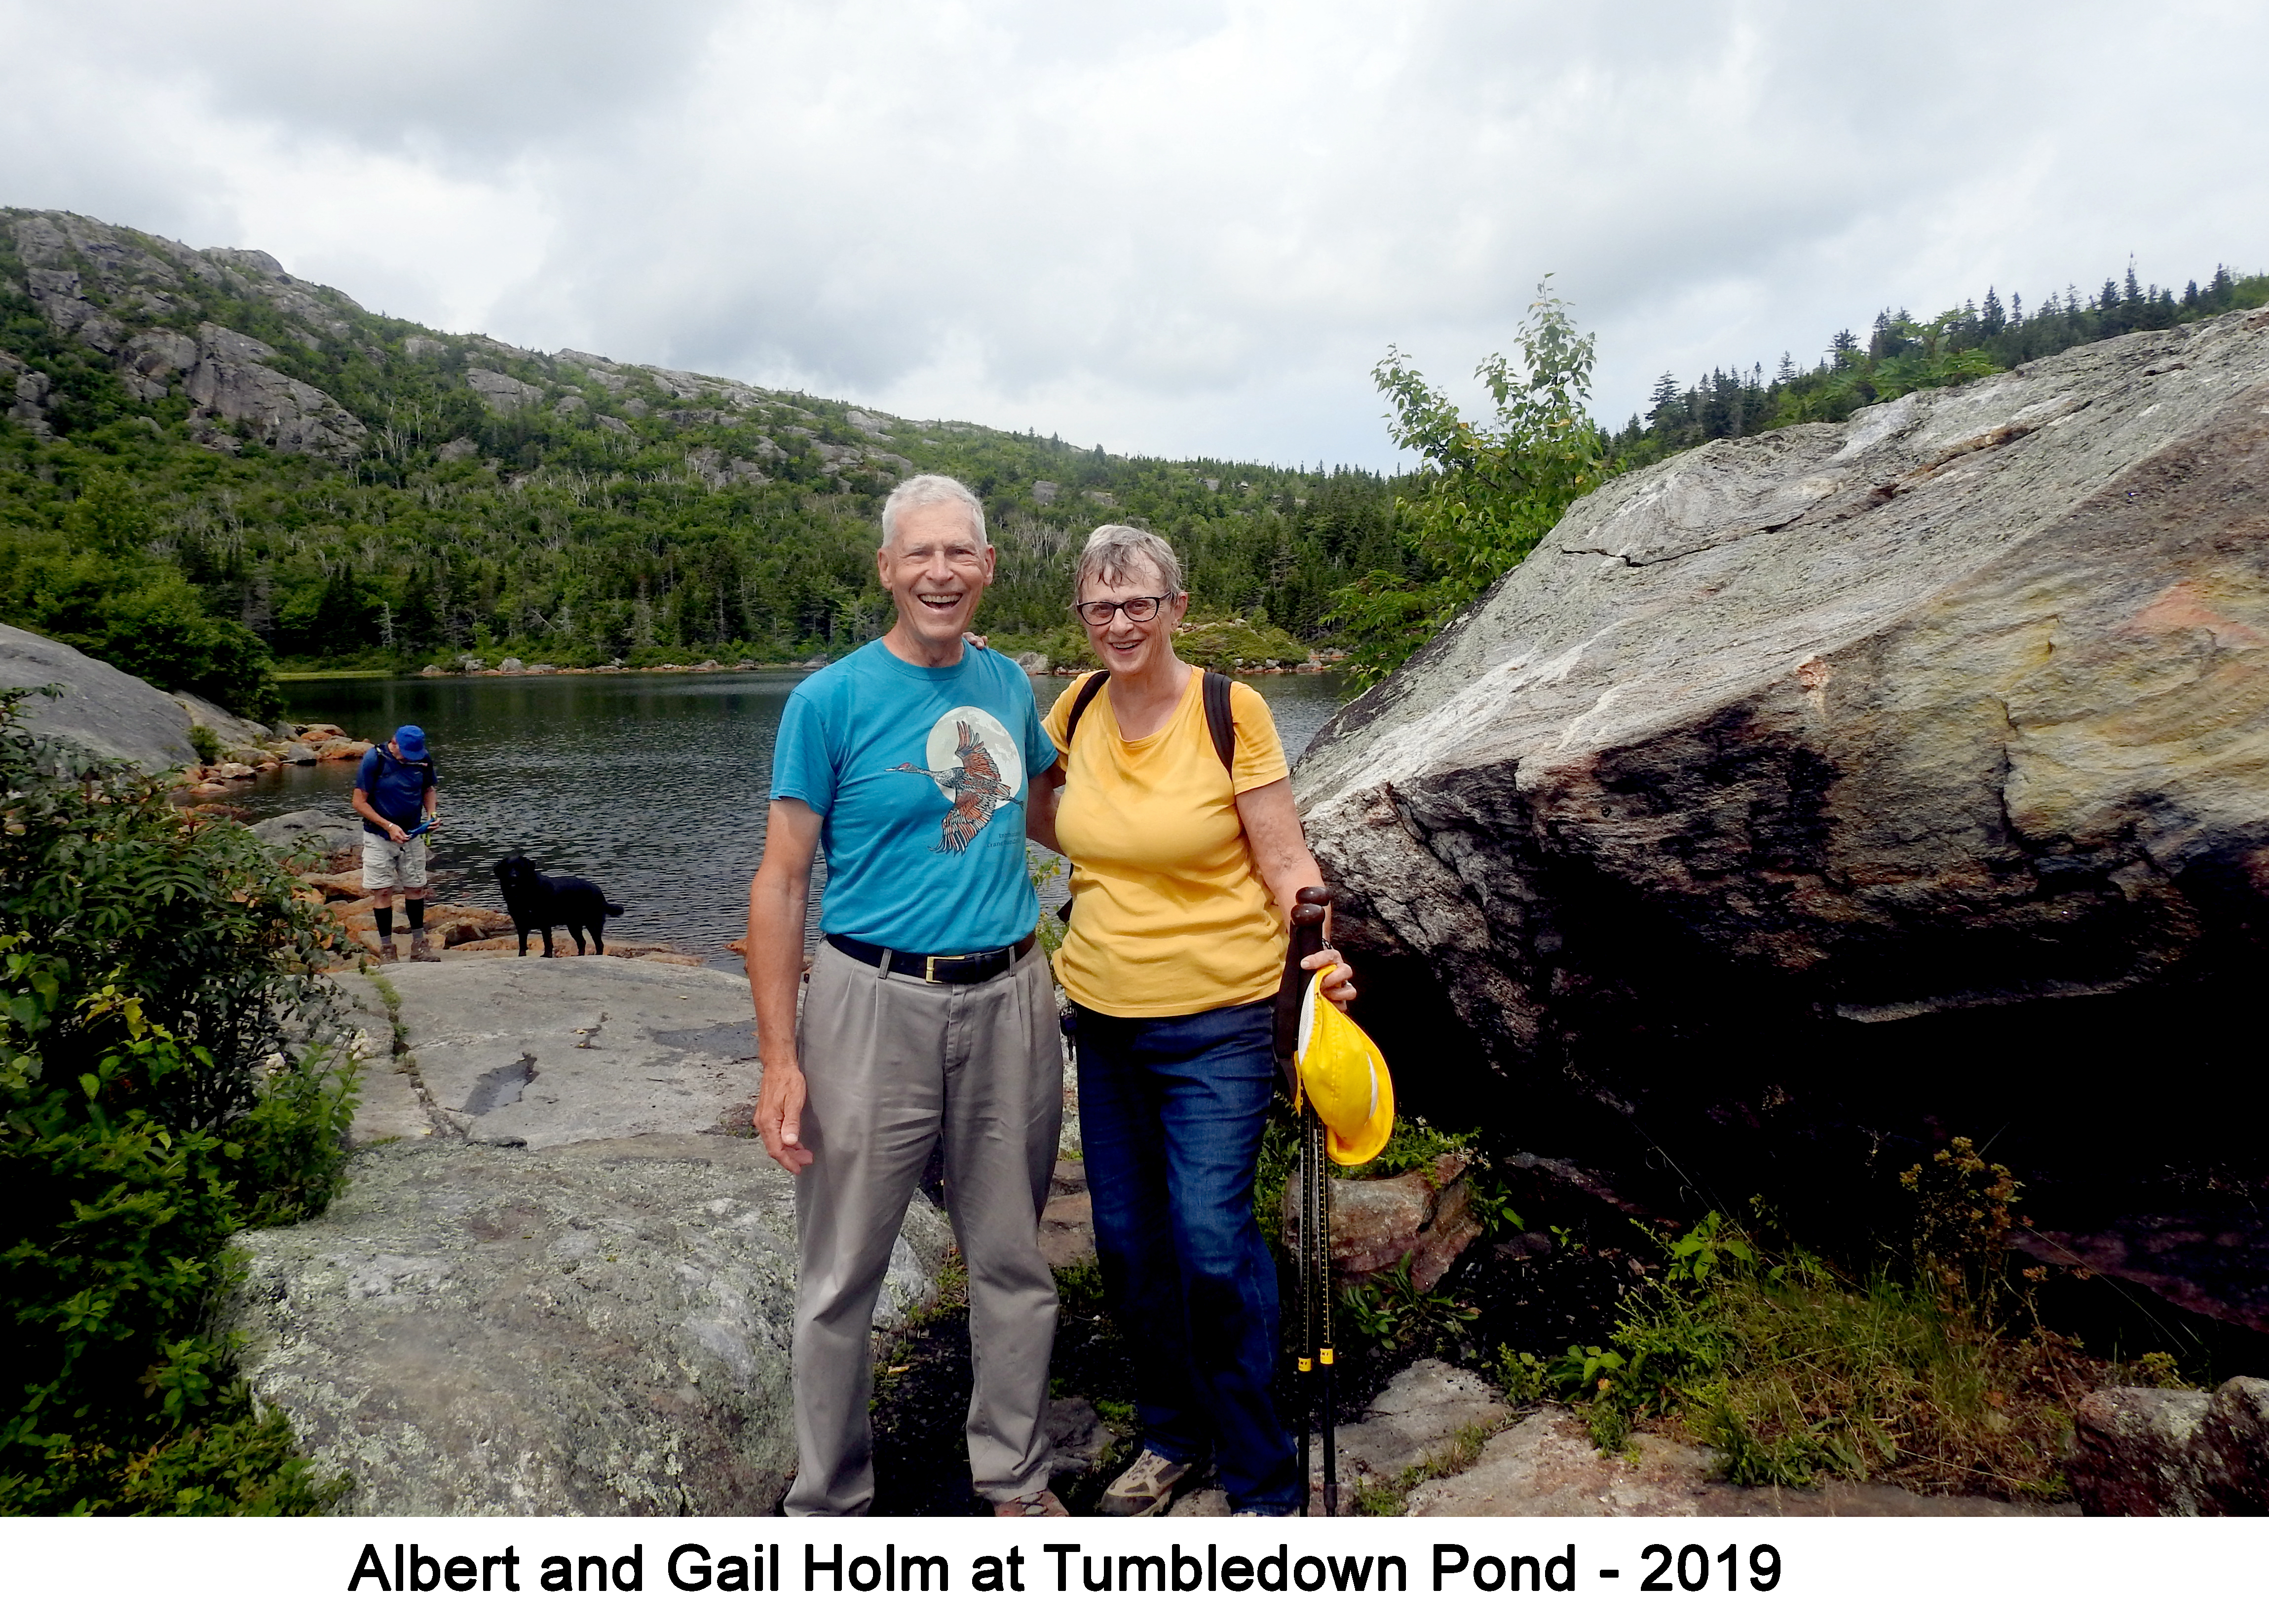 We are standing in front of the lake with a large boulder on the right
        side of the photo and Tumbledown Mountain on the left side